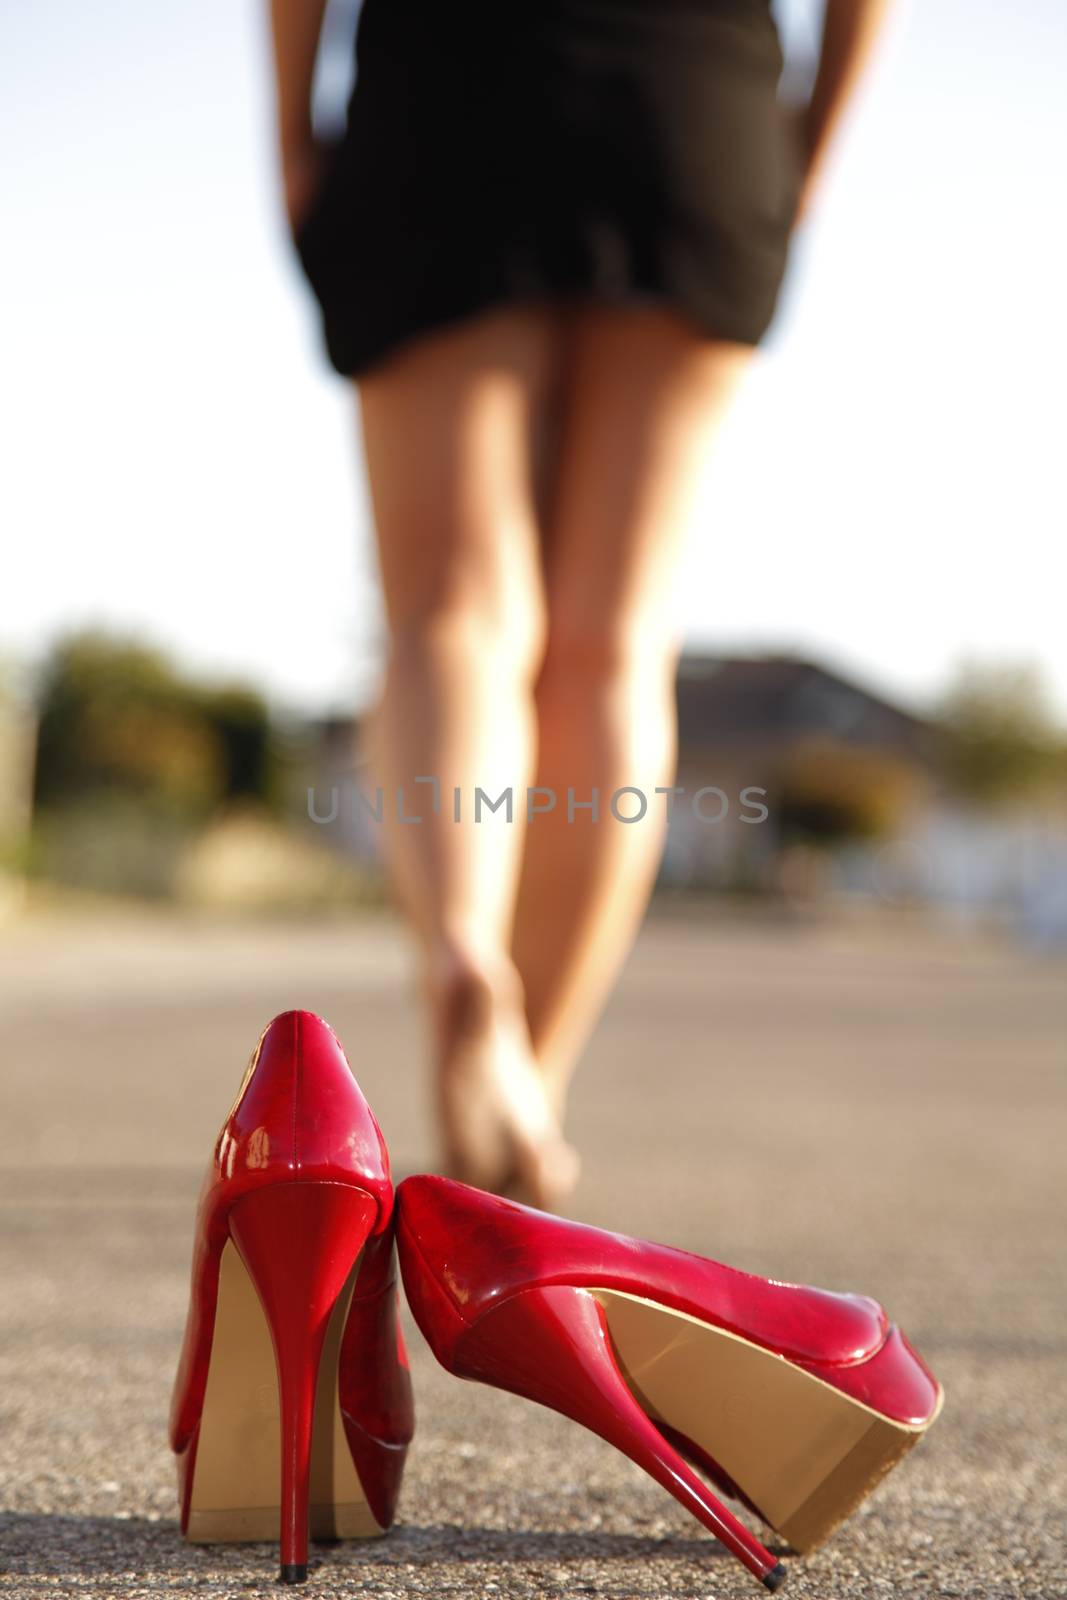 Red high heels standing on the street an a woman goes away barefoot by 25ehaag6